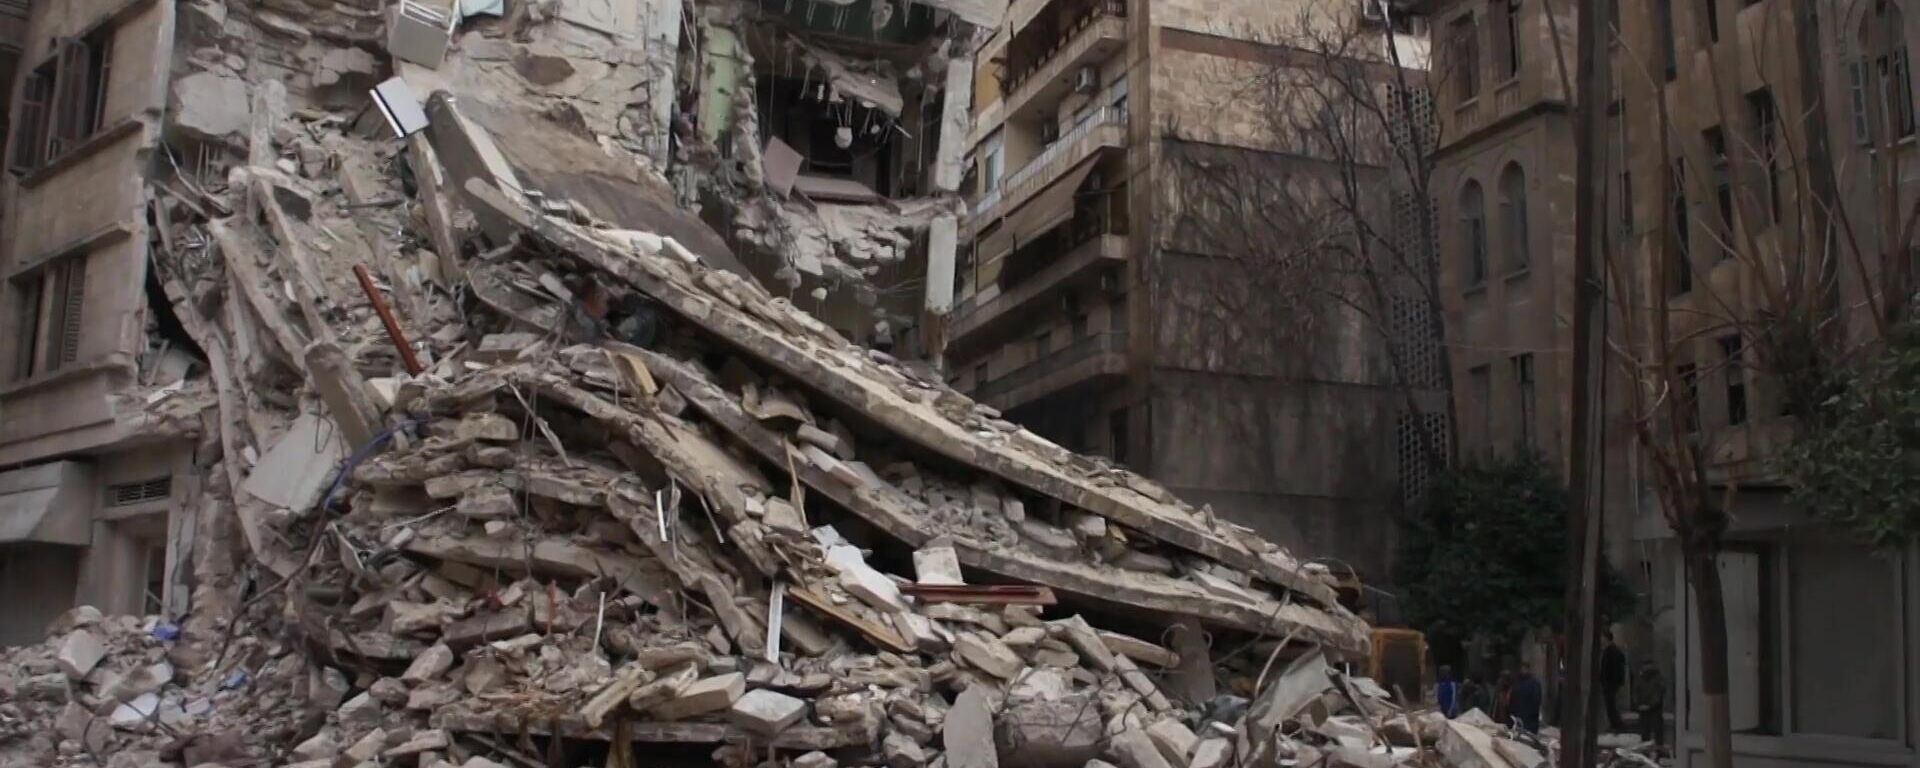 A residential building destroyed by a magnitude 7.8 earthquake that occurred on February 6 is seen in Aleppo, Syria - Sputnik International, 1920, 10.02.2023